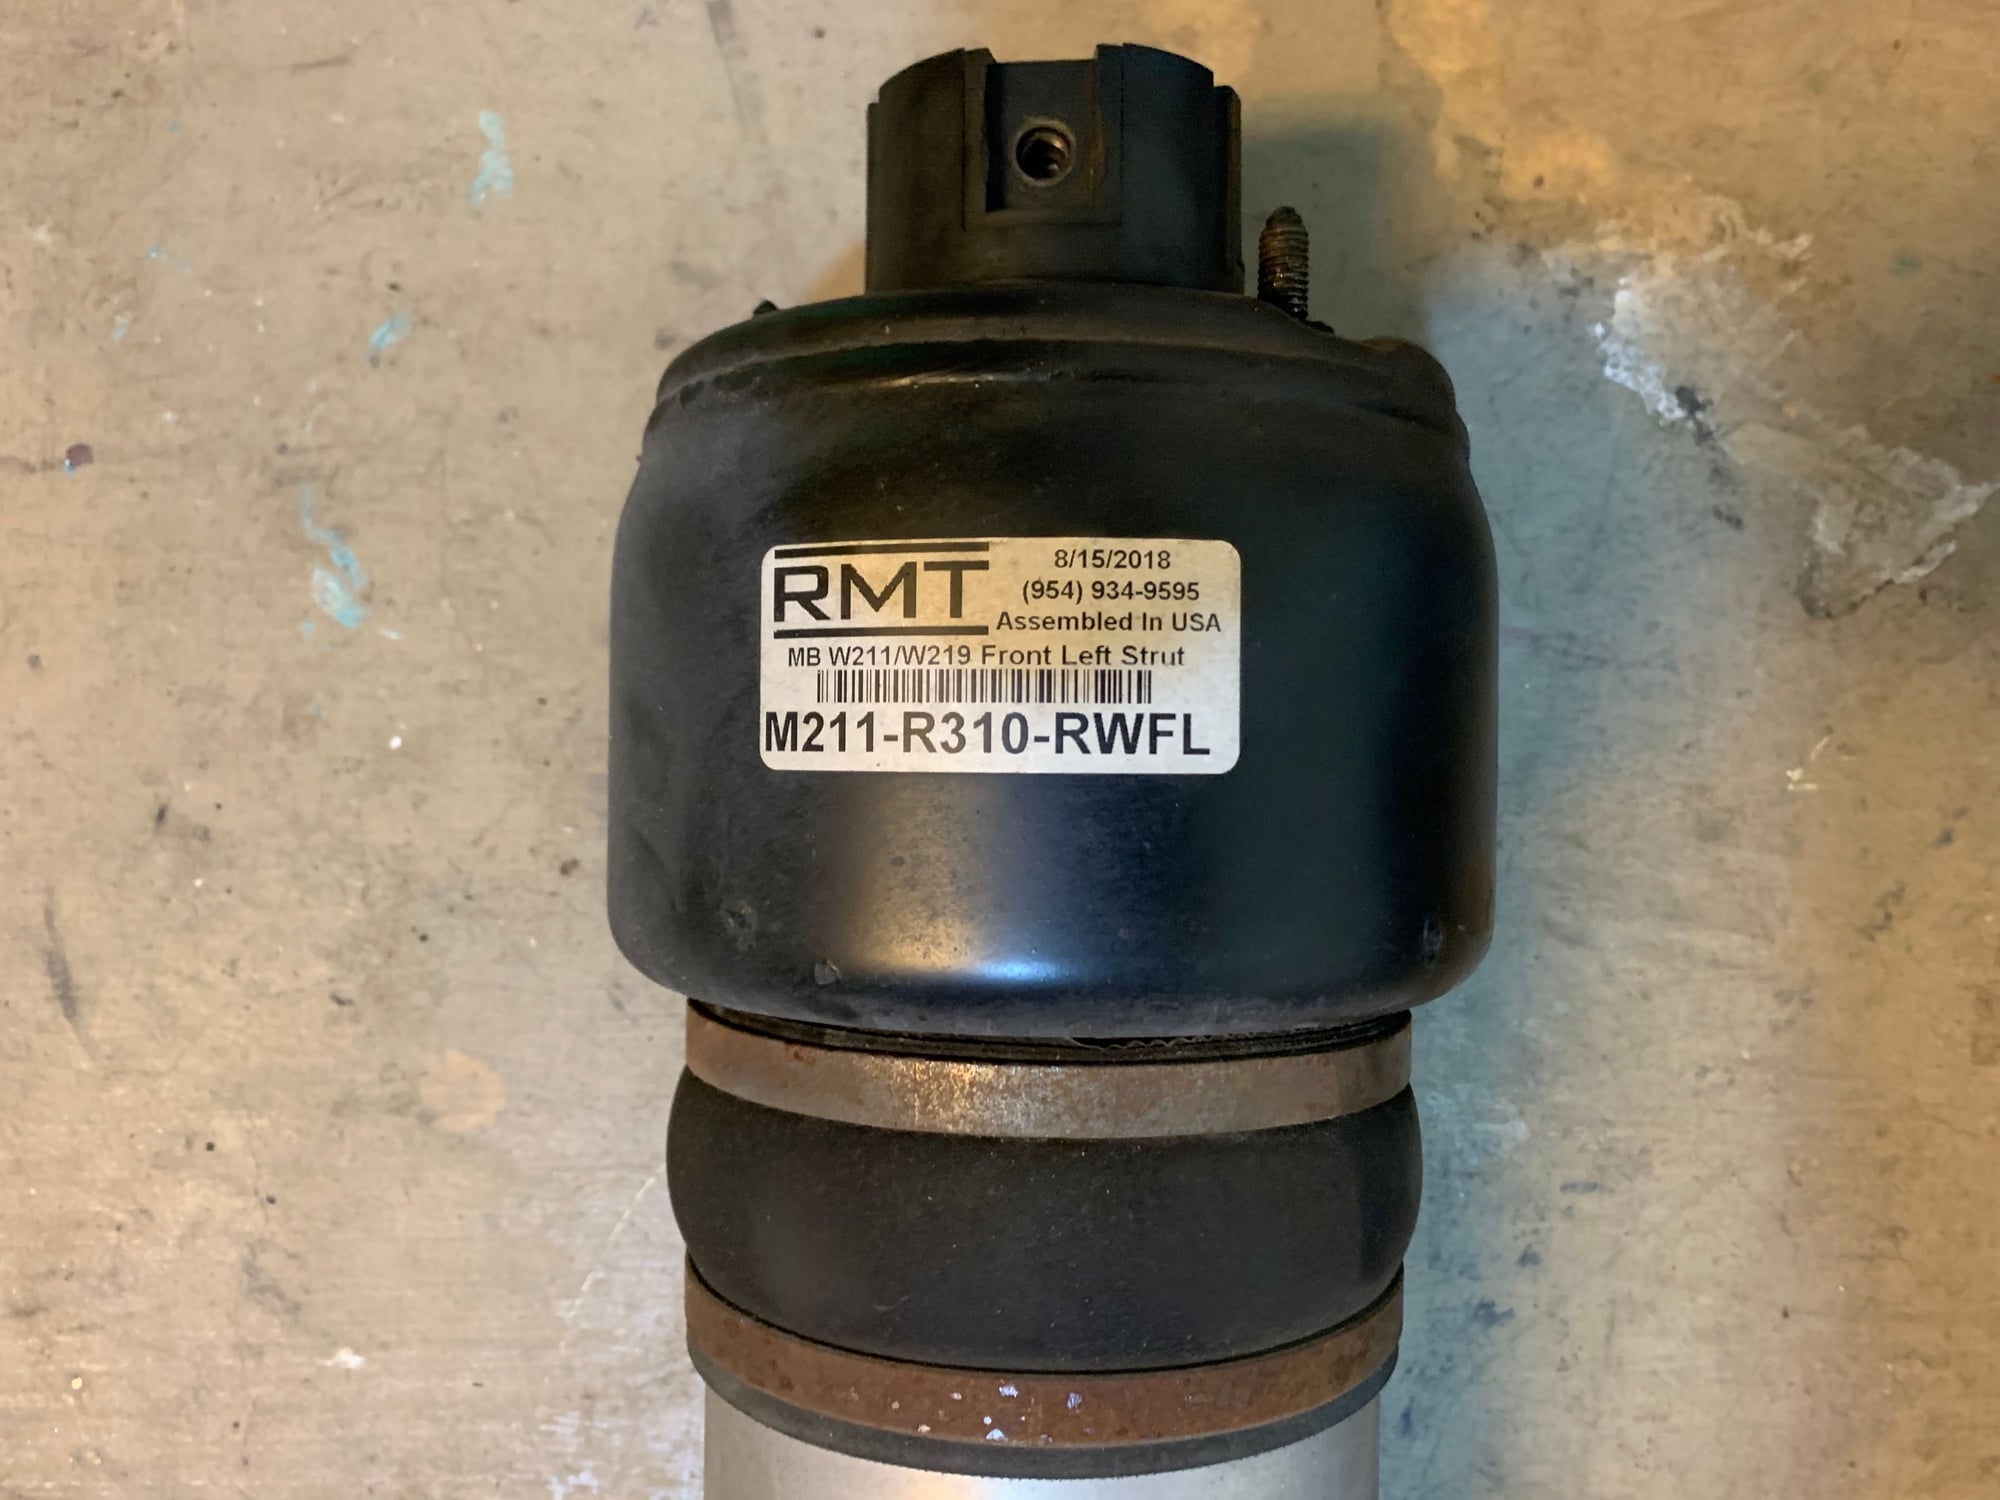 Steering/Suspension - W211 E500 front left RMT airmatic shock one year old - Used - 2003 to 2006 Mercedes-Benz E500 - Austin, TX 78729, United States